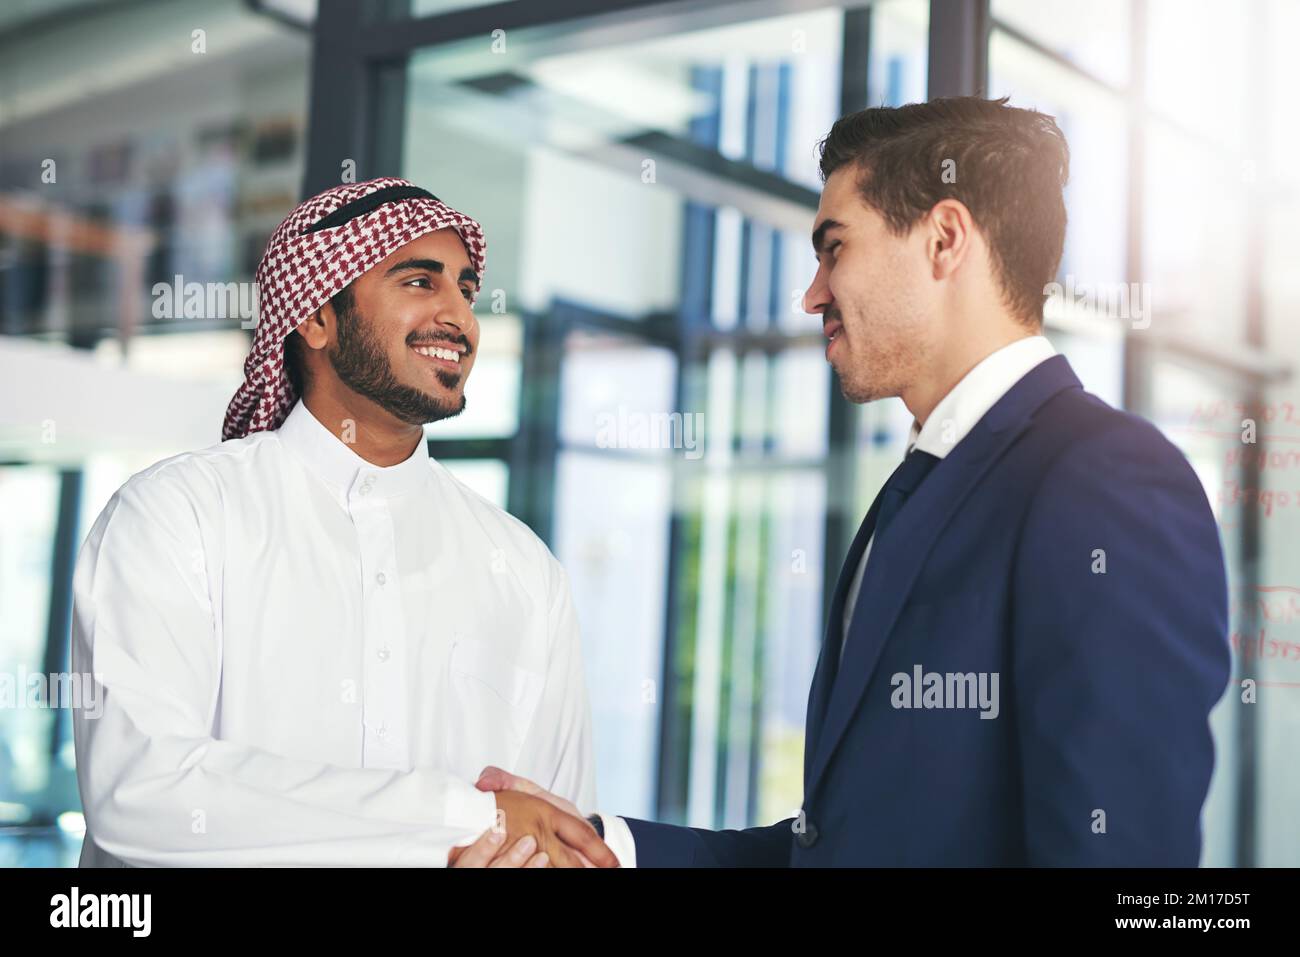 Business built on a mutual purpose. Shot of a young muslim businessman shaking hands with an associate in a modern office. Stock Photo